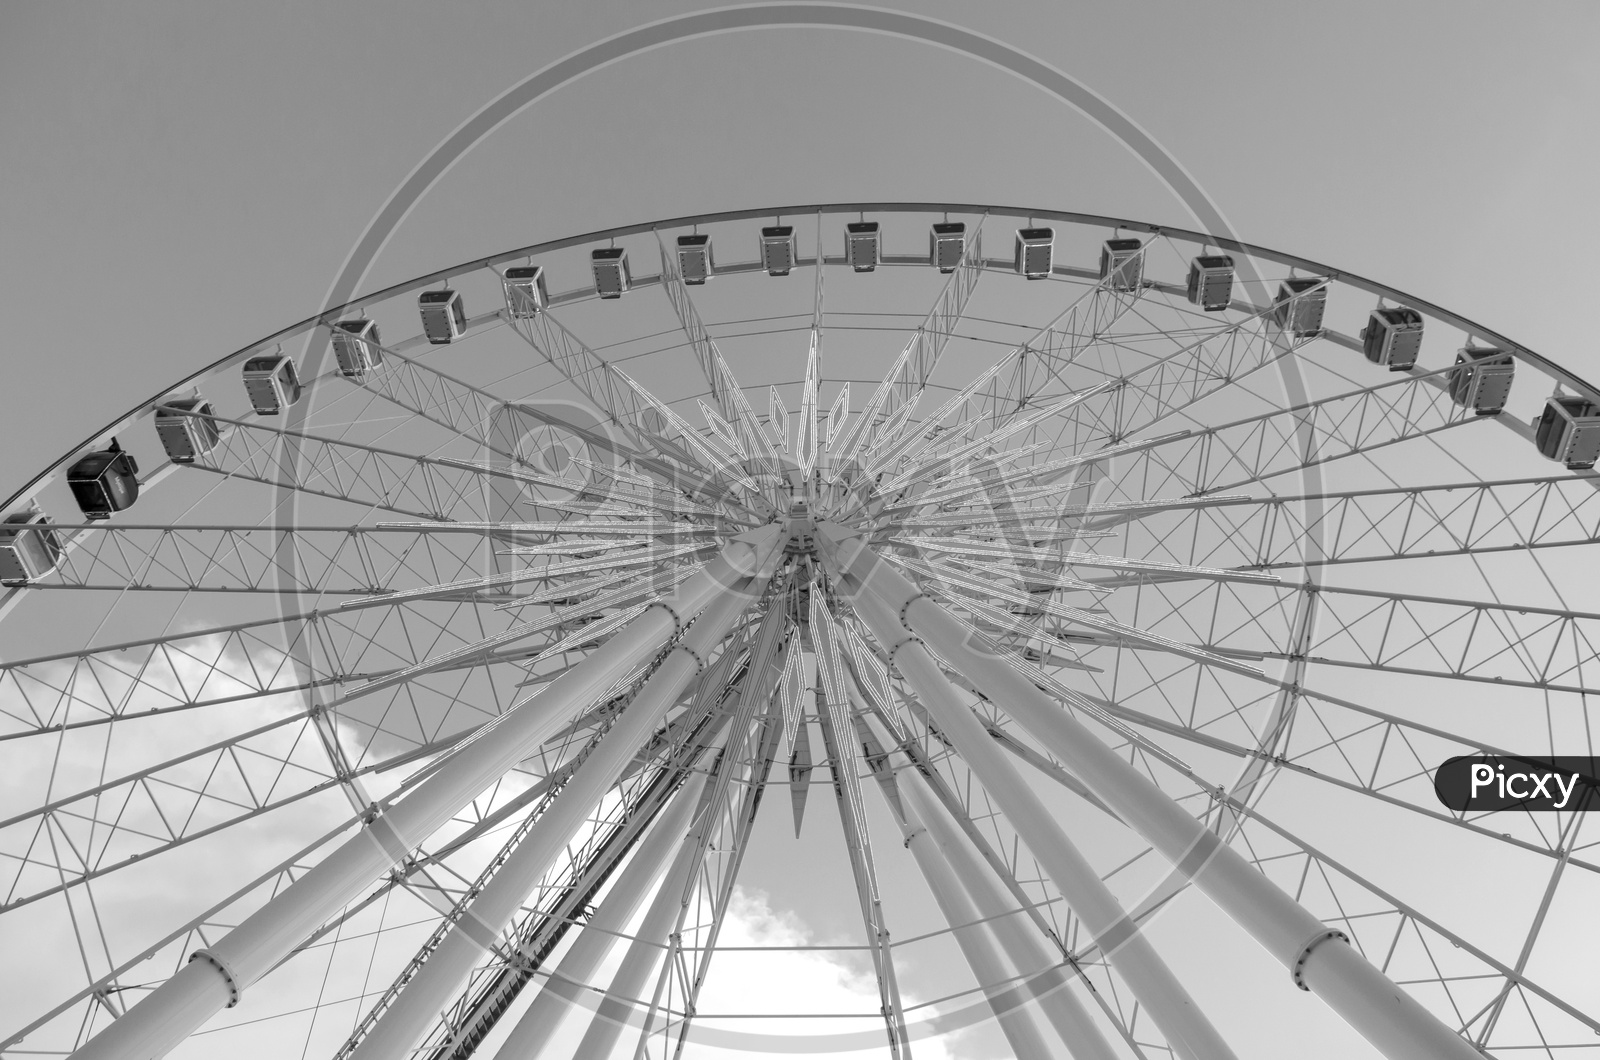 Beautiful large Ferris wheel in black and white